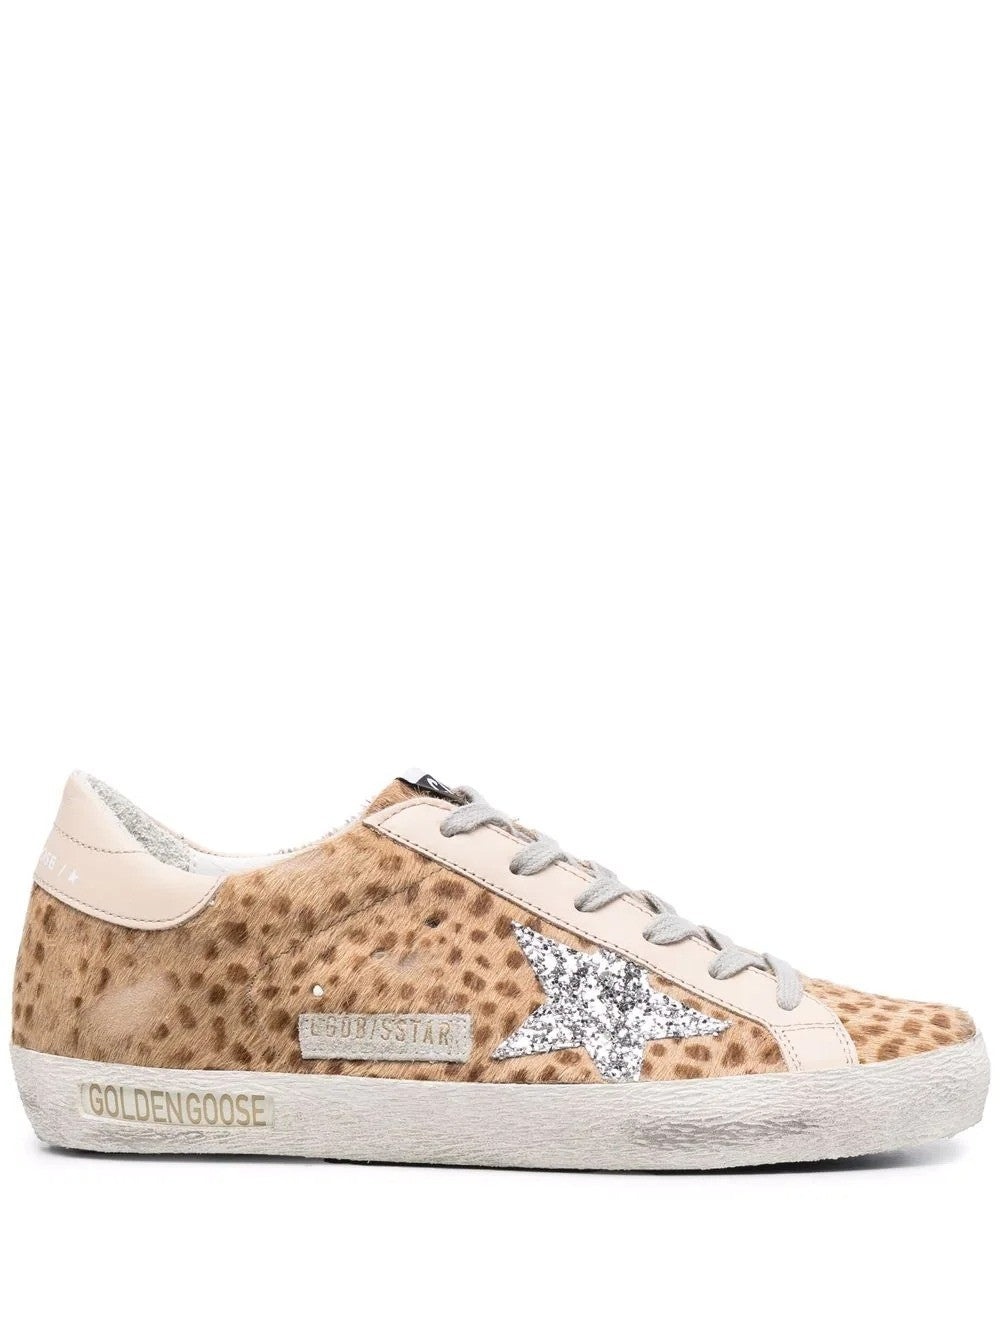 Golden Goose Deluxe Brand Shoes Yellow Woman - 1